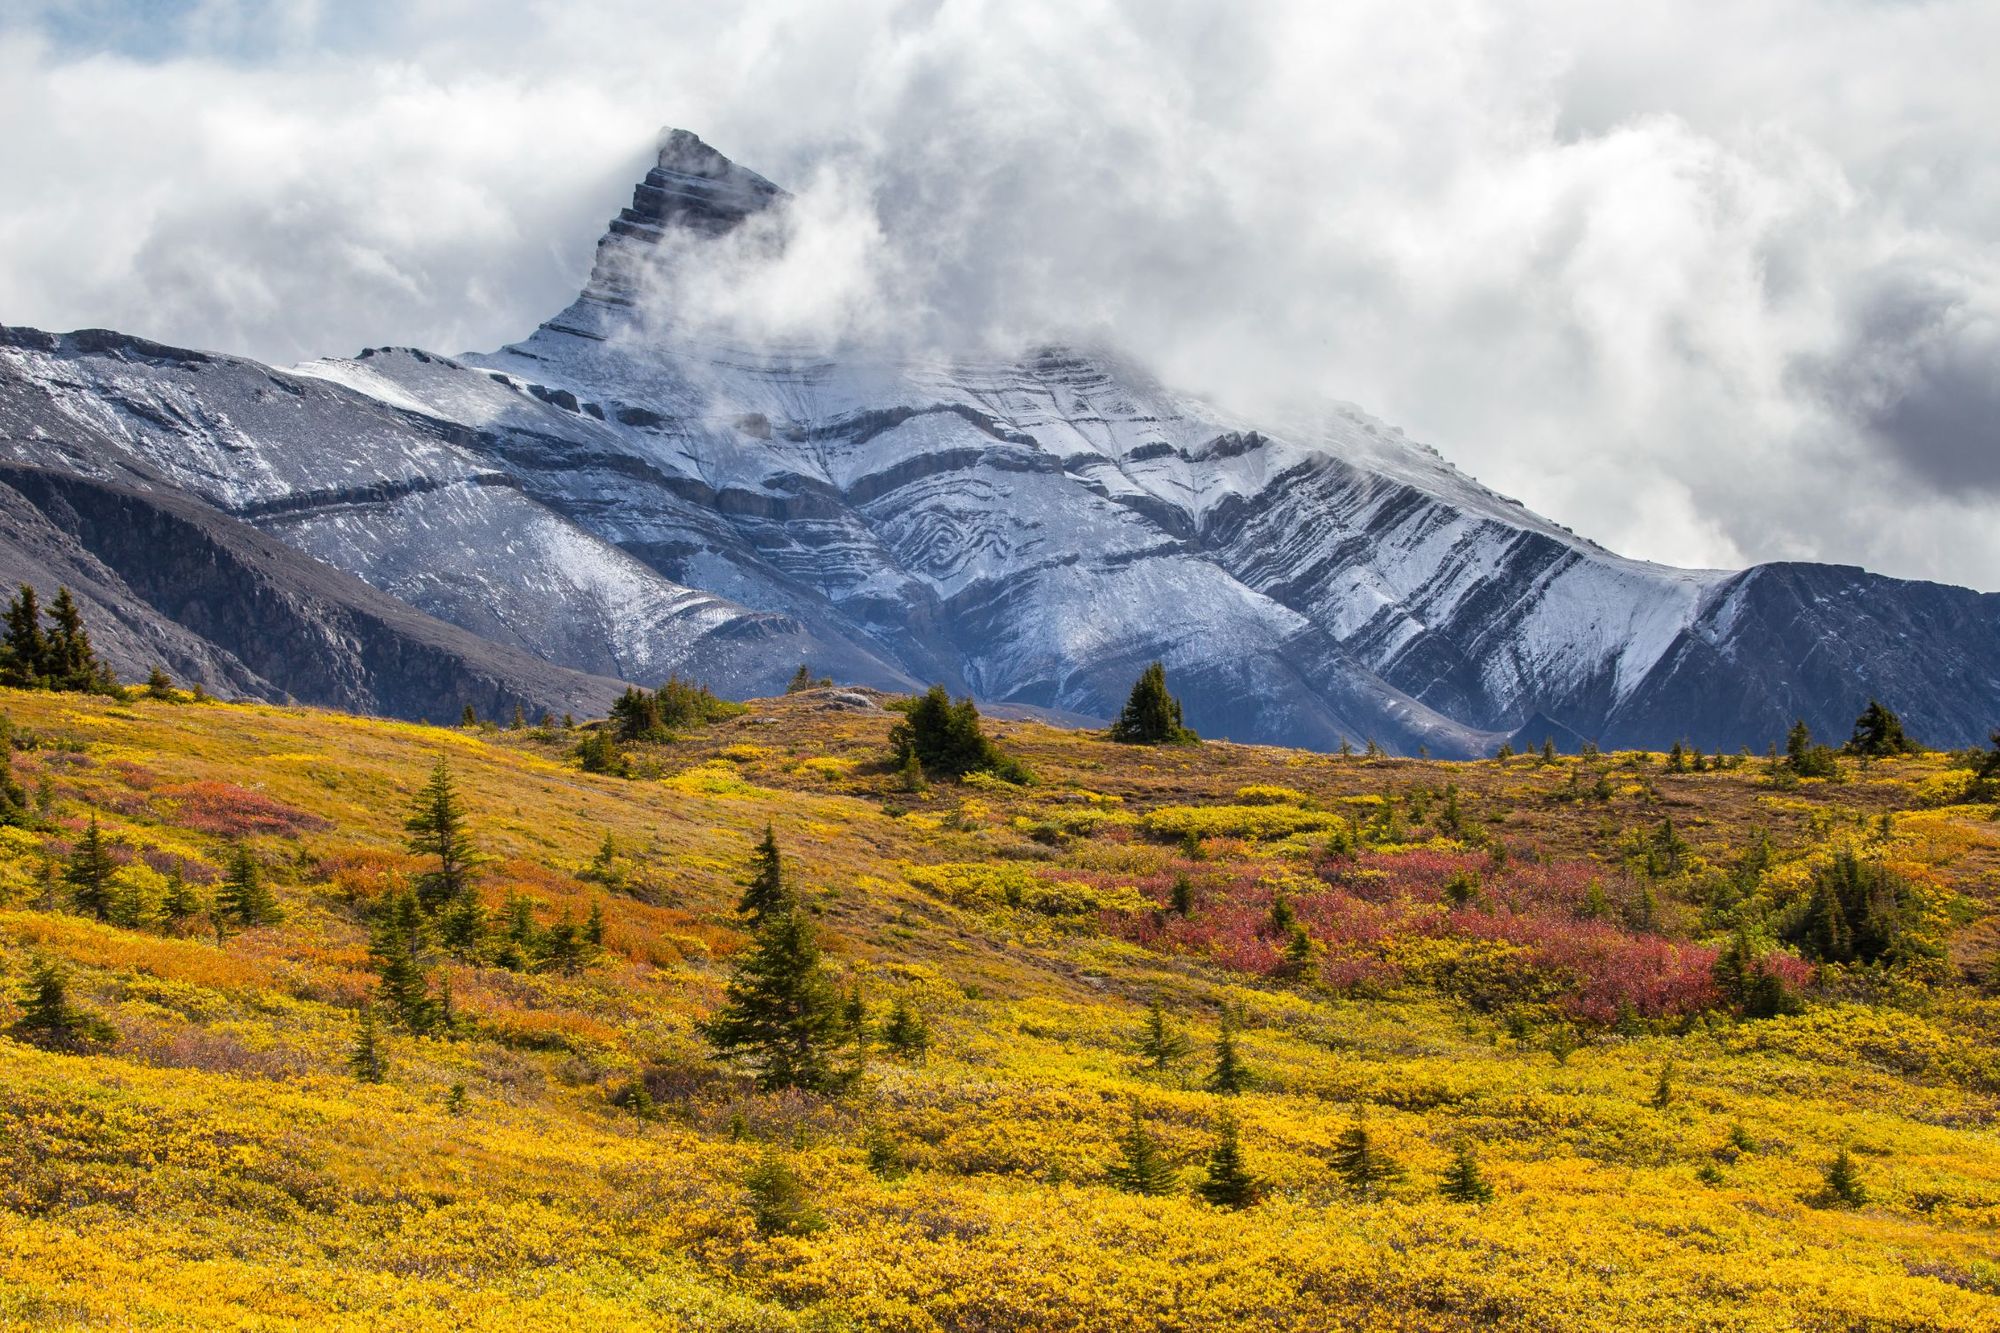 The Autumn tundra on the Wilcox Pass Trail in the Canadian Rockies. Photo: Getty